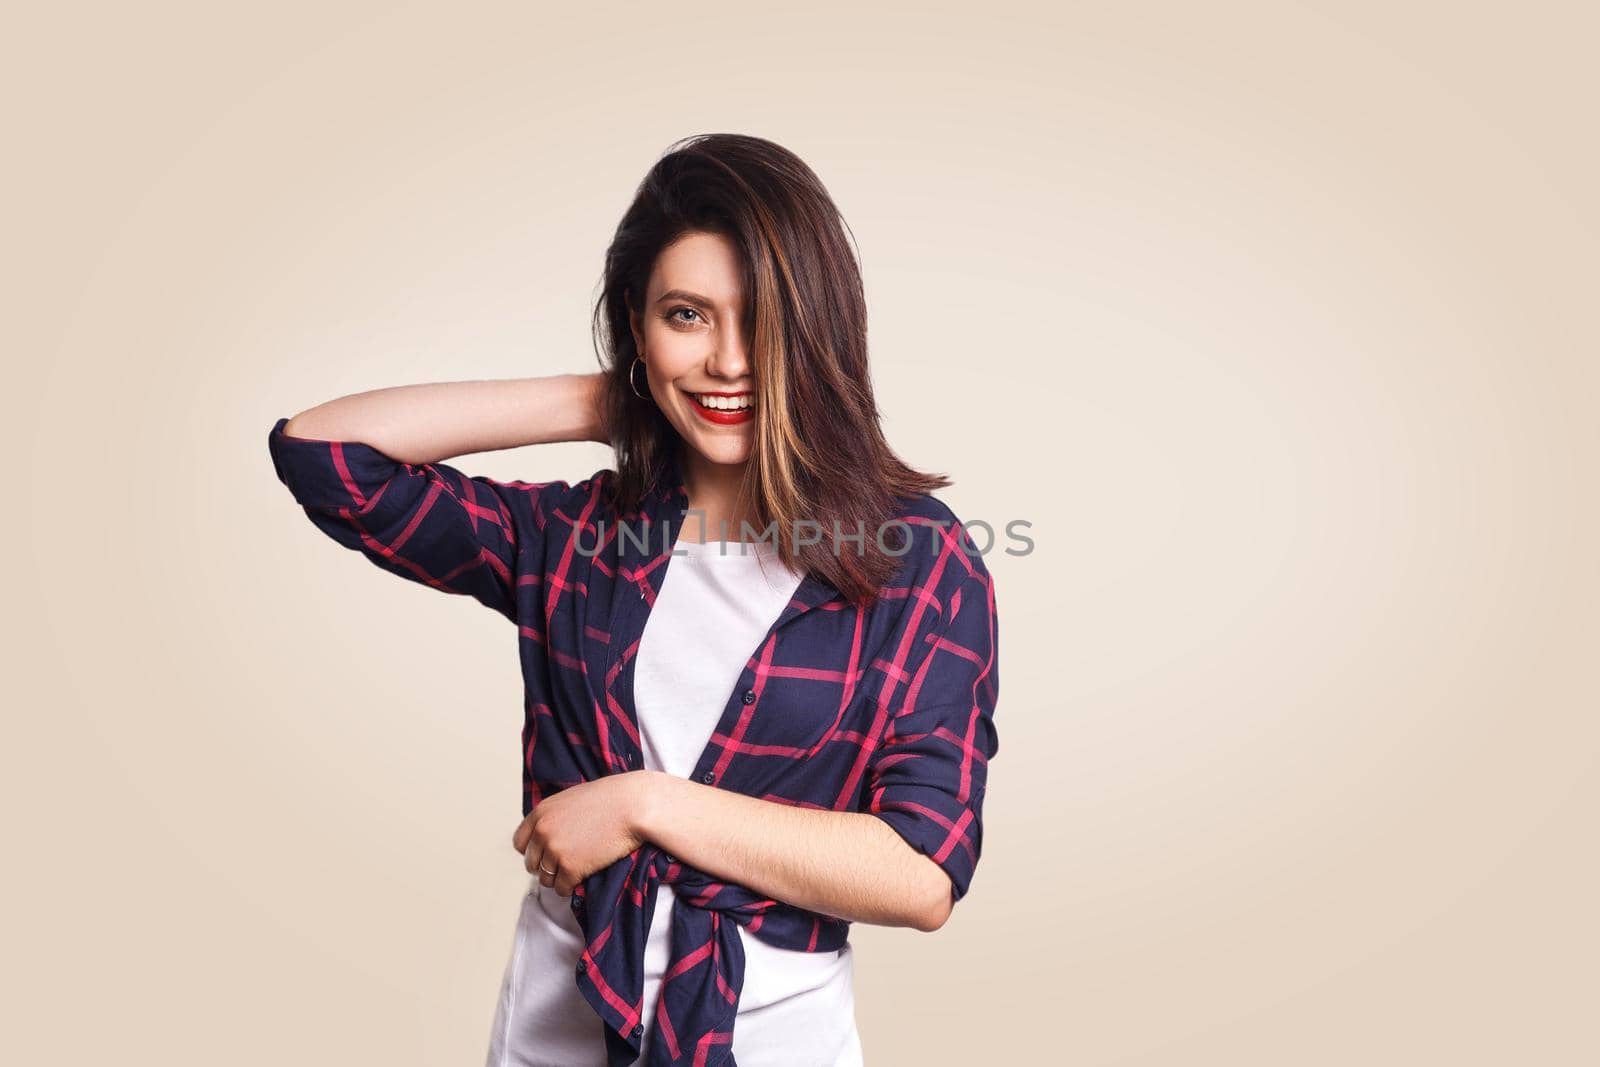 Portrait of beautiful happy girl in casual style with makeup and black bun hairstyle looking at camera with toothy smile and touching her hair. studio shot on beige background.